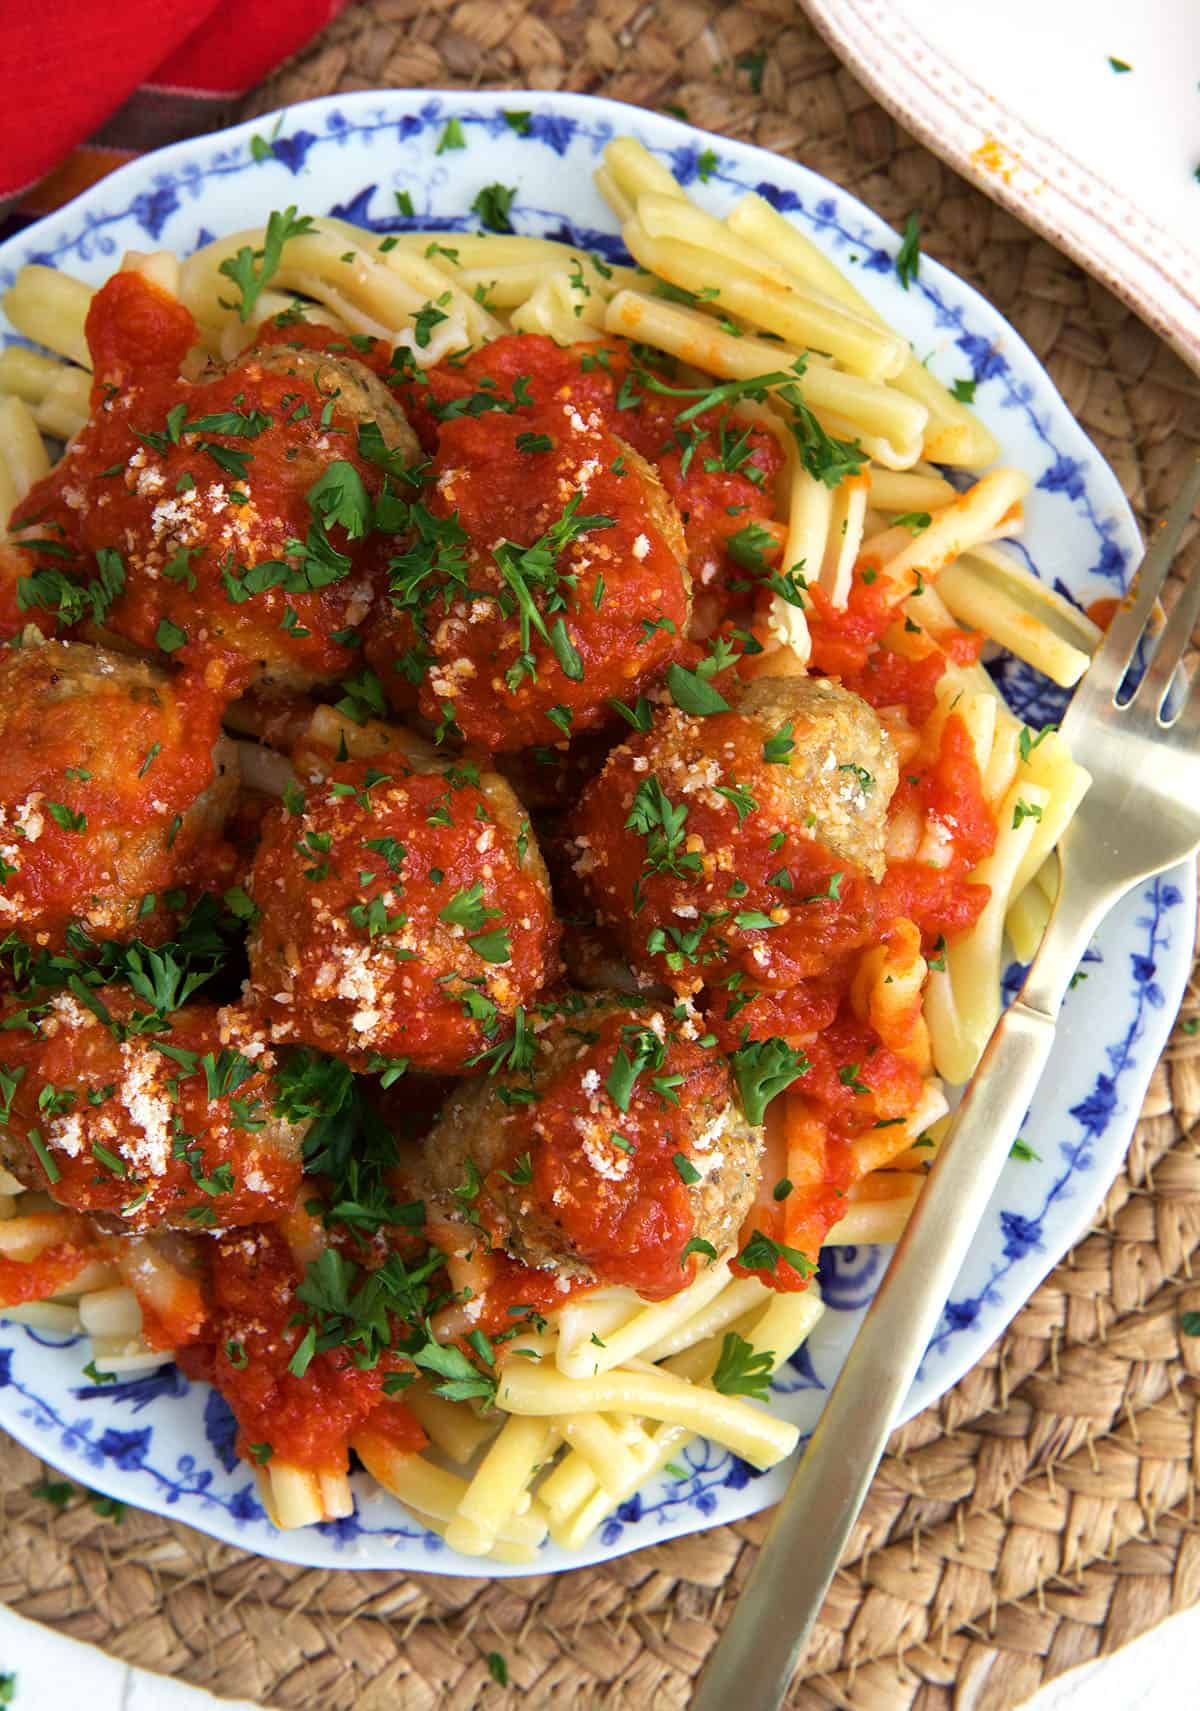 Pasta is served with red sauce and meatballs. 